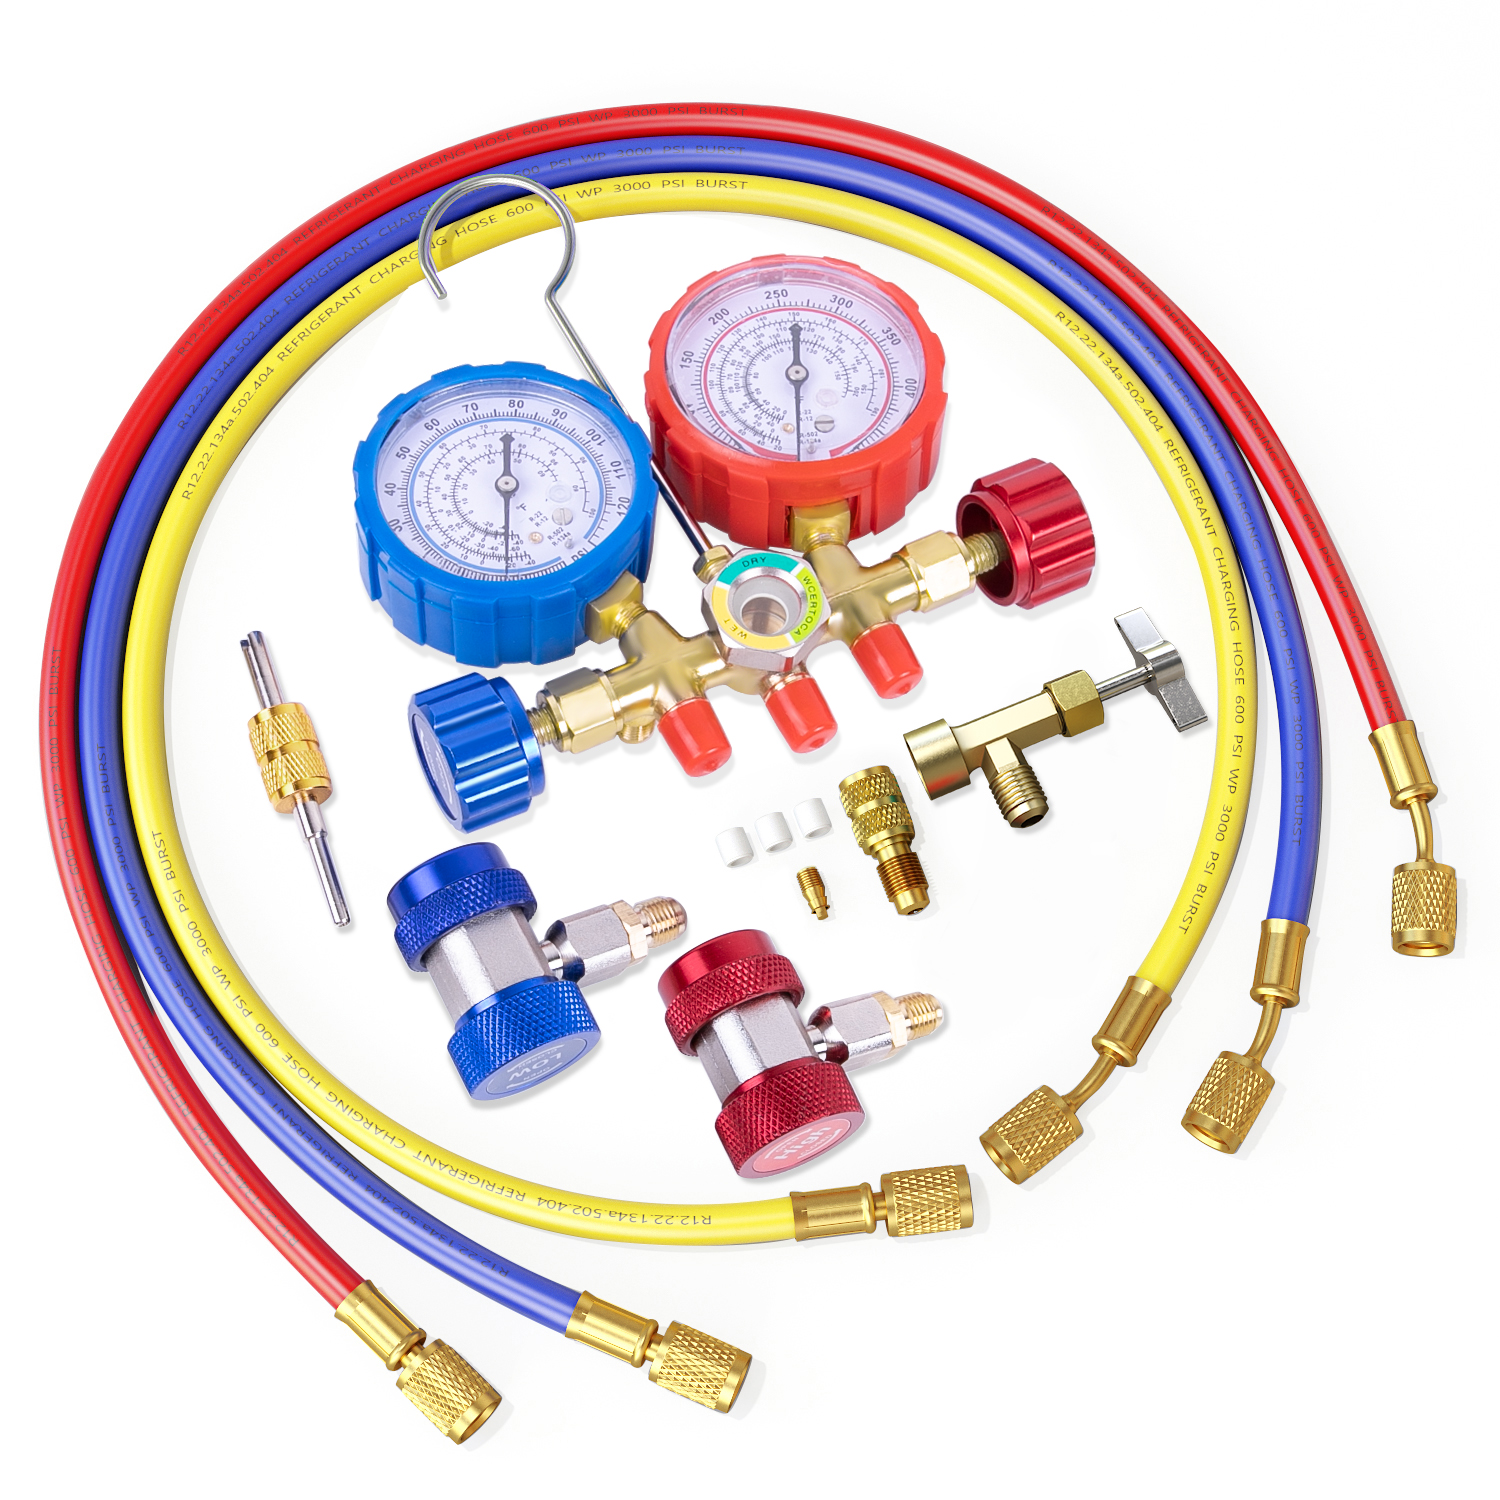 2022 UPGRATE Version Way AC Manifold Gauge Set, Fits R134A R12 R22 and R502  Refrigerants, with 5FT Hose, Acme Tank Adapters, Couplers and Can Tap 